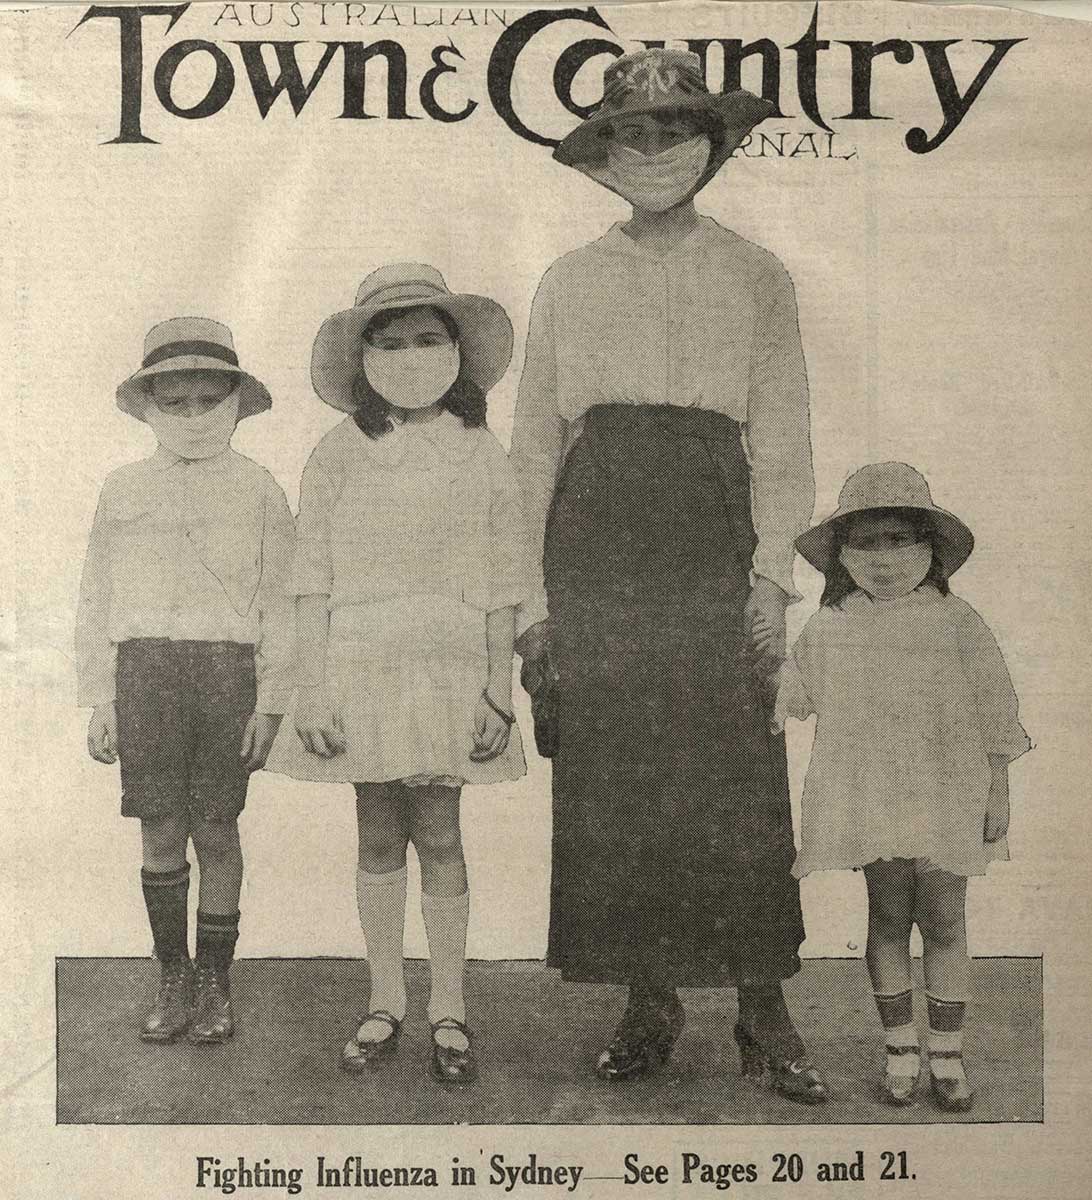 Cover of a publication titled 'Australian Town & Country. It features a woman and three children wearing facemasks. Printed underneath is "Fighting Influenza in Sydney – see pages 20 and 21."